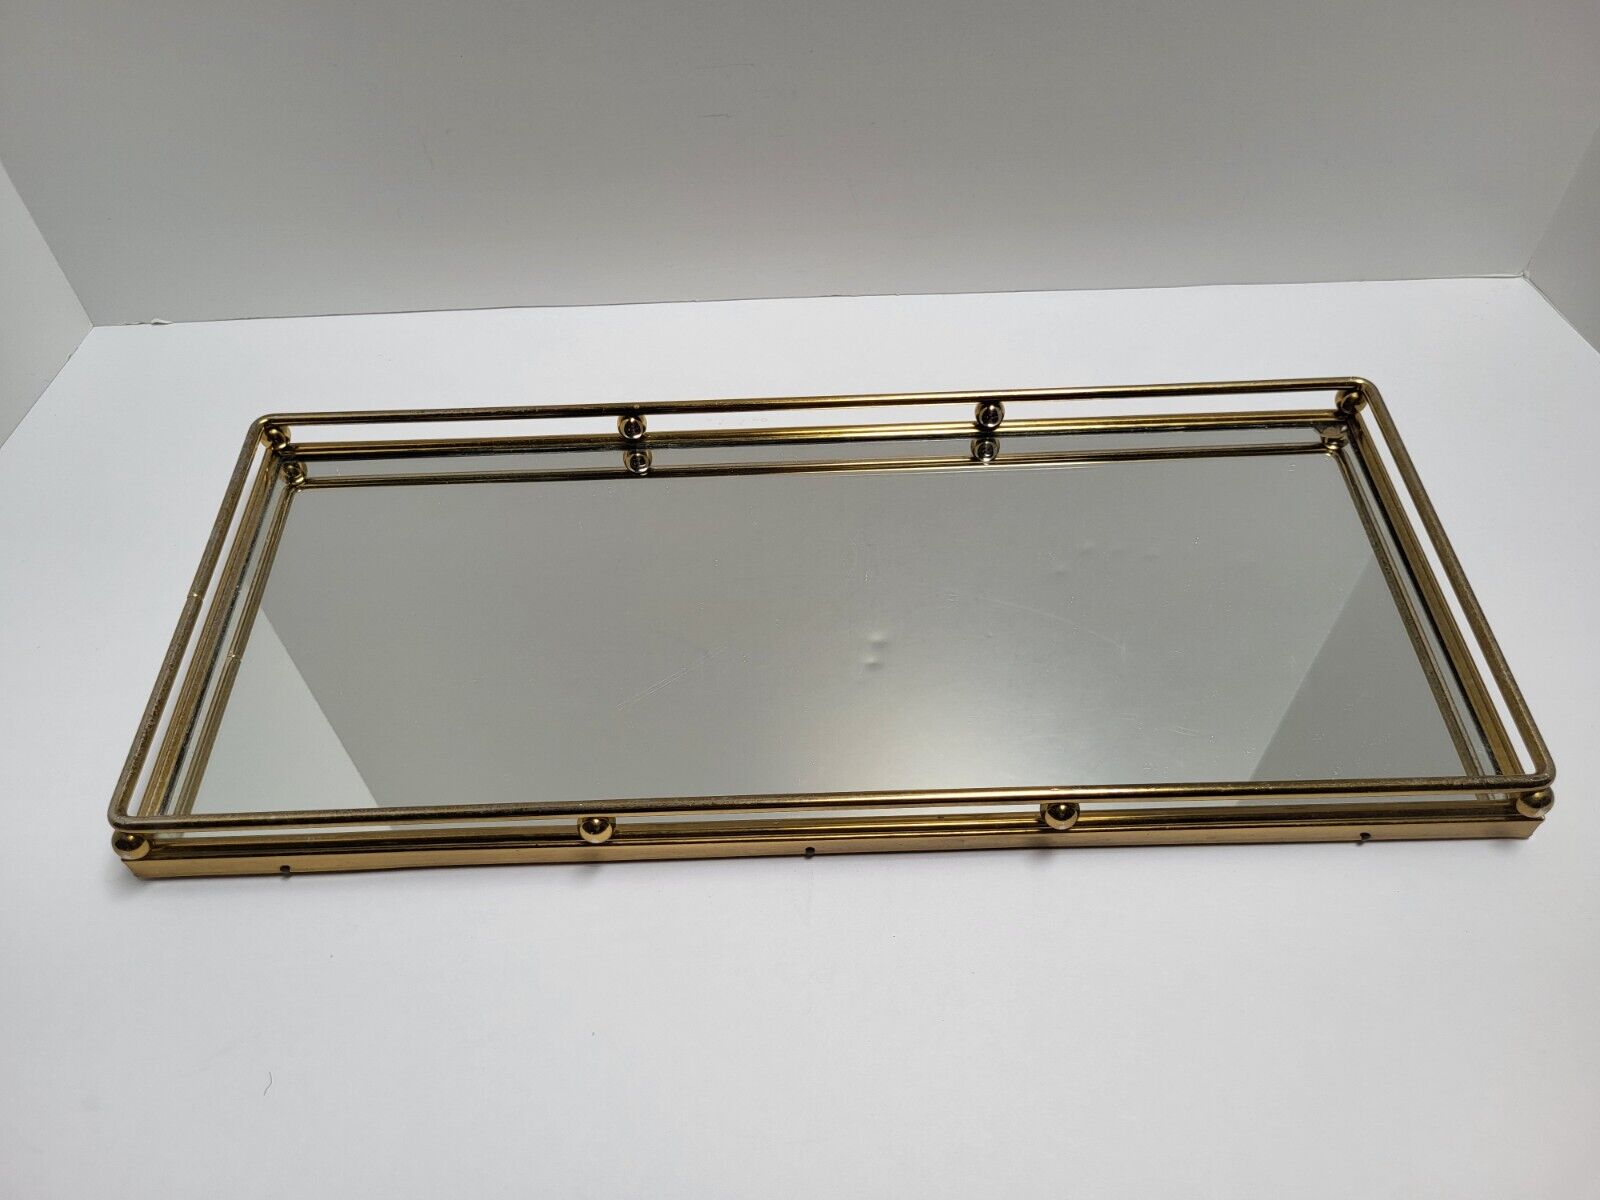 Vintage Mirrored Vanity Dresser Tray Antique Brass and Glass